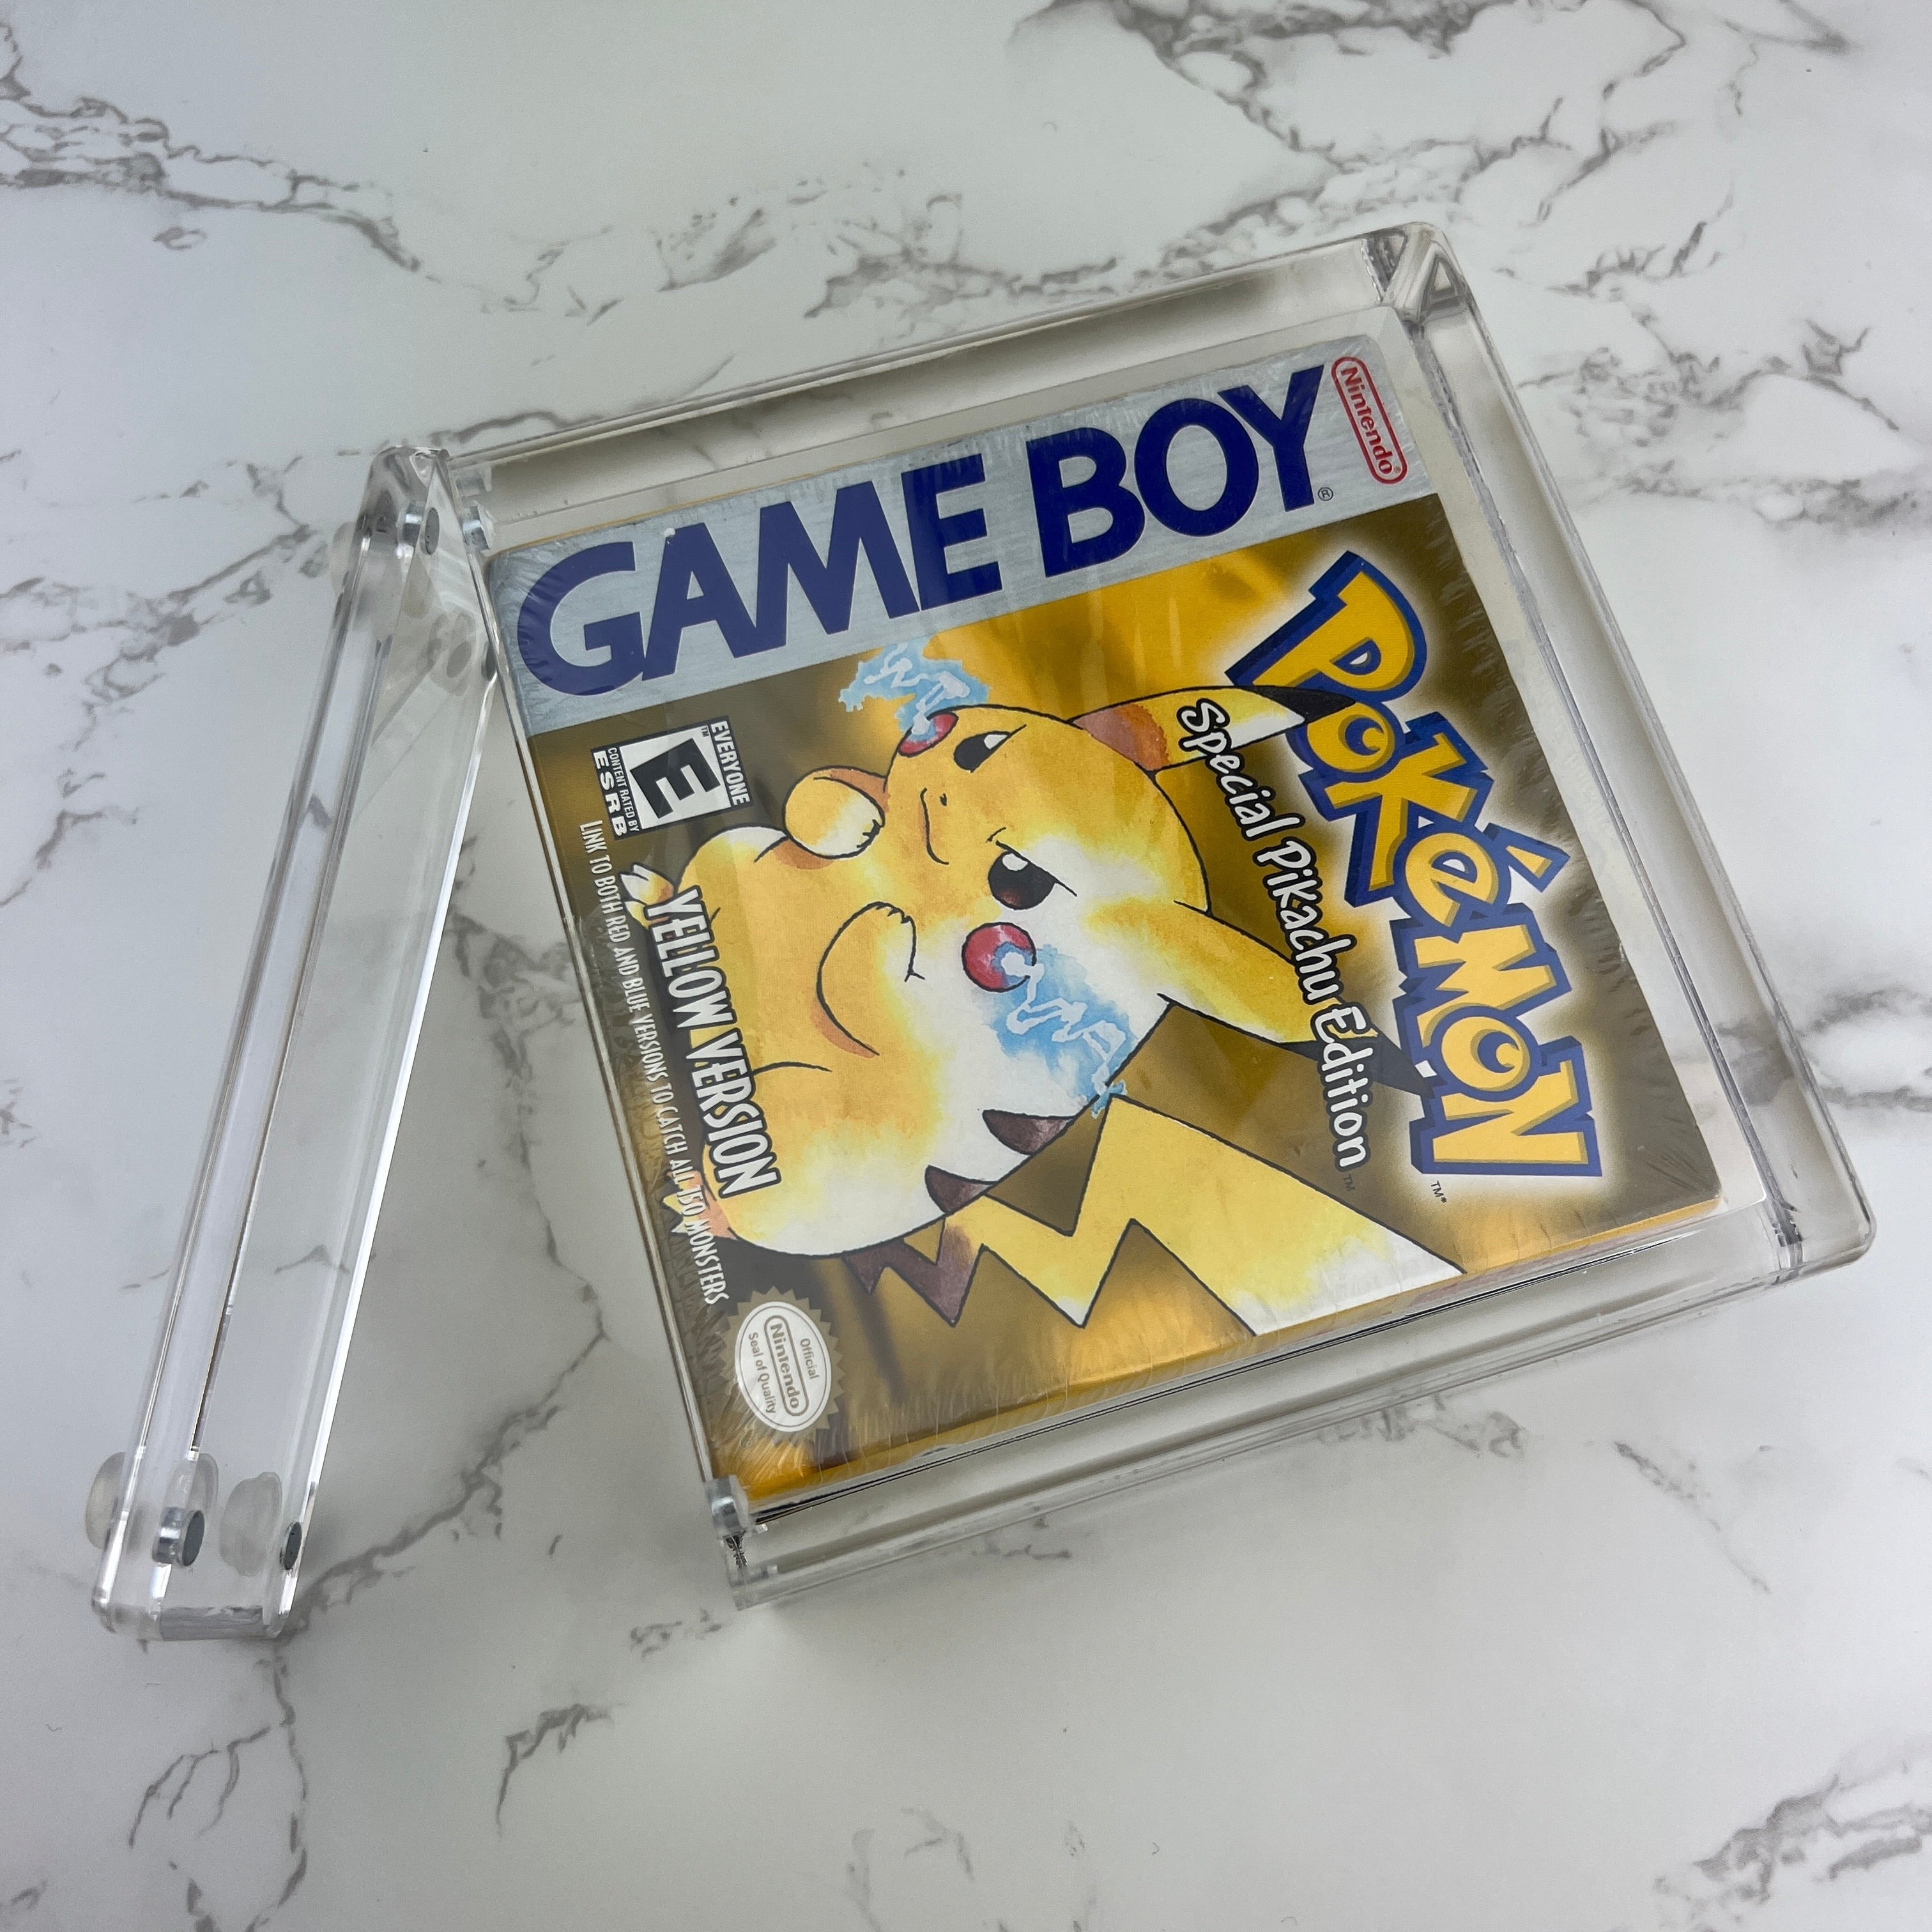 Gameboy game magnetic acrylic protective case. Crystal clear acrylic, with UV resistance. Fits both Gameboy Color and Gameboy Advance games.